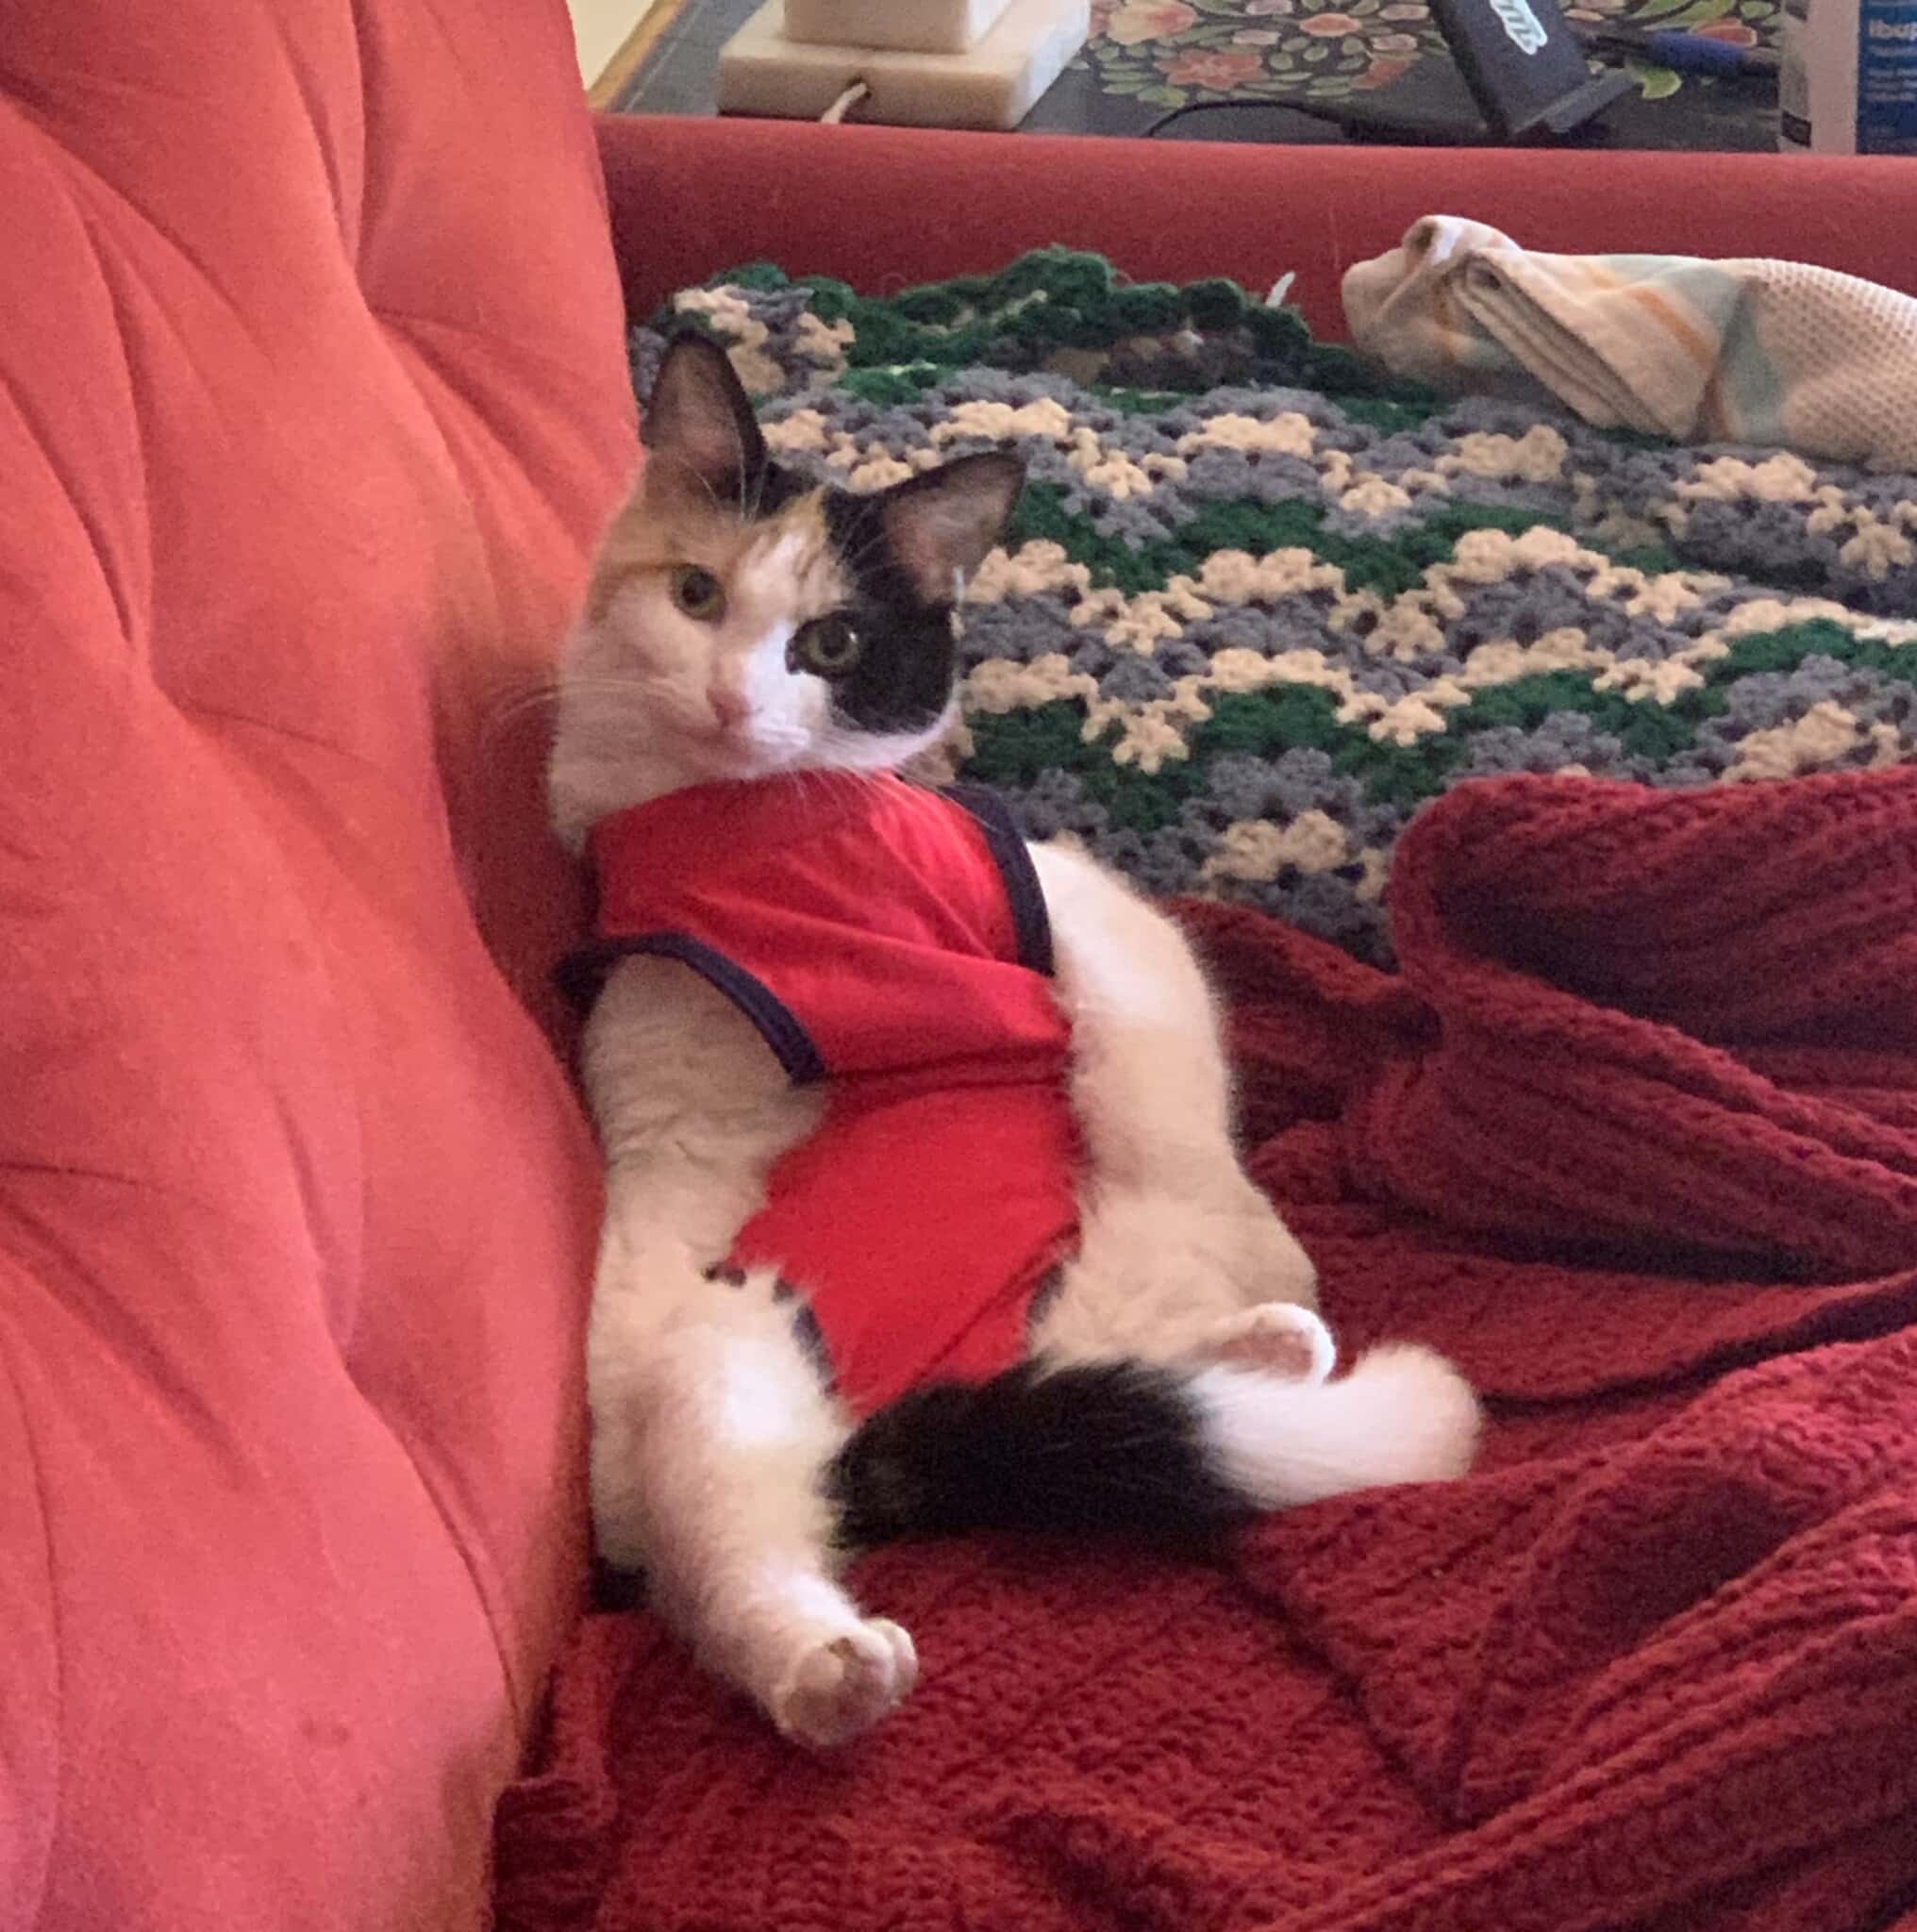 Small calico cat wears red pajamas while sitting ungracefully on a red couch